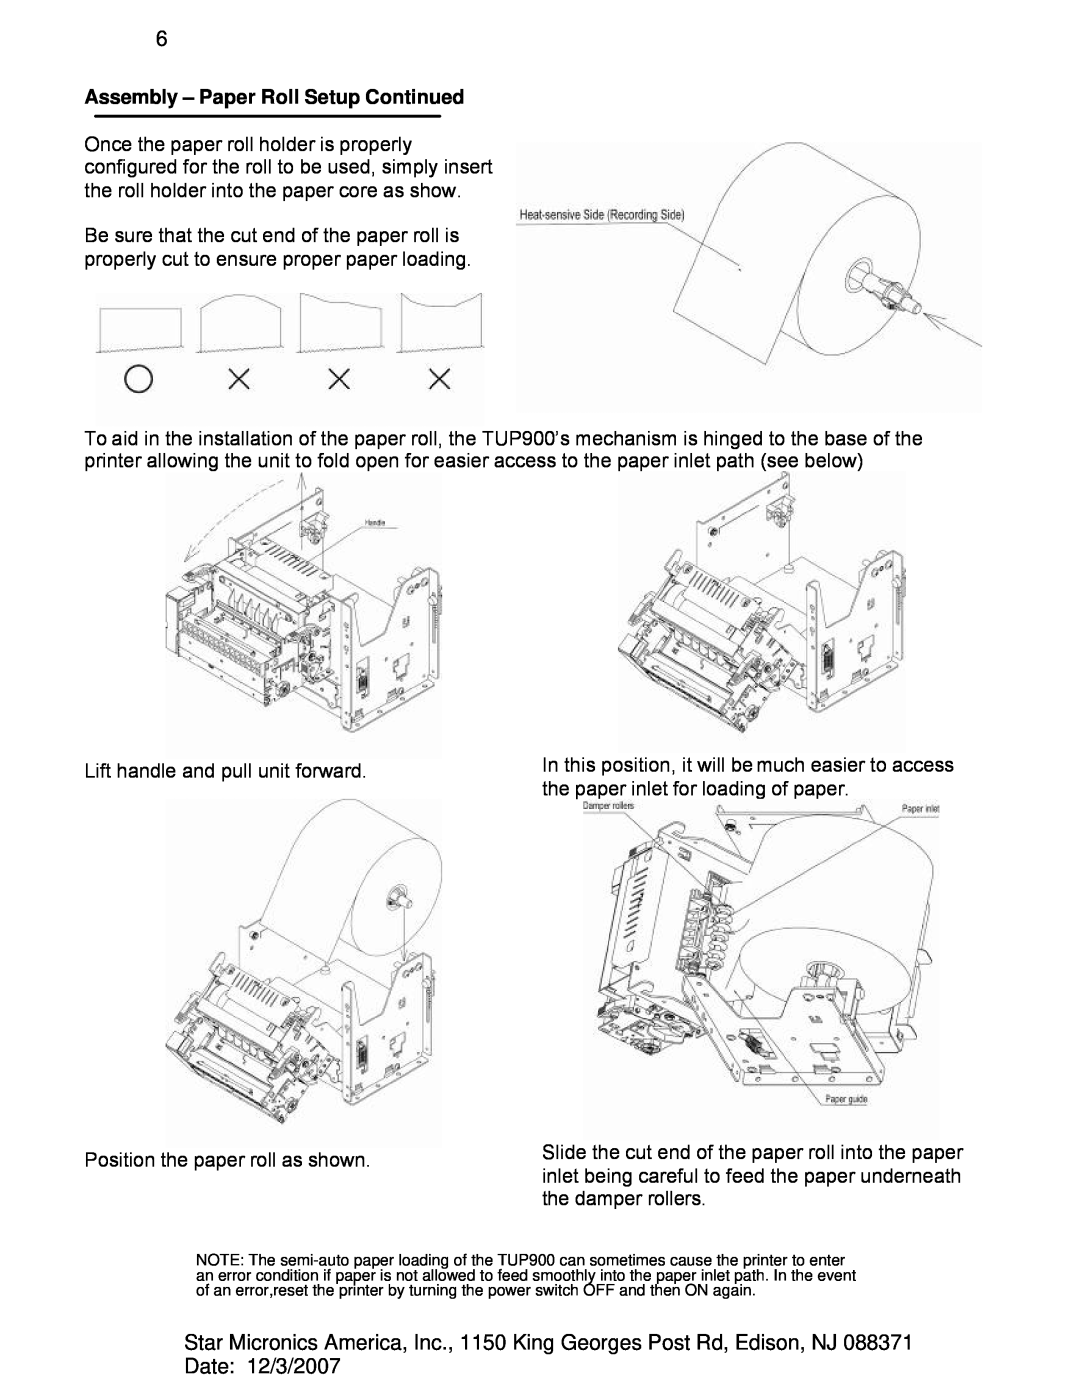 Star Micronics TUP942, TUP992 manual Assembly - Paper Roll Setup Continued 